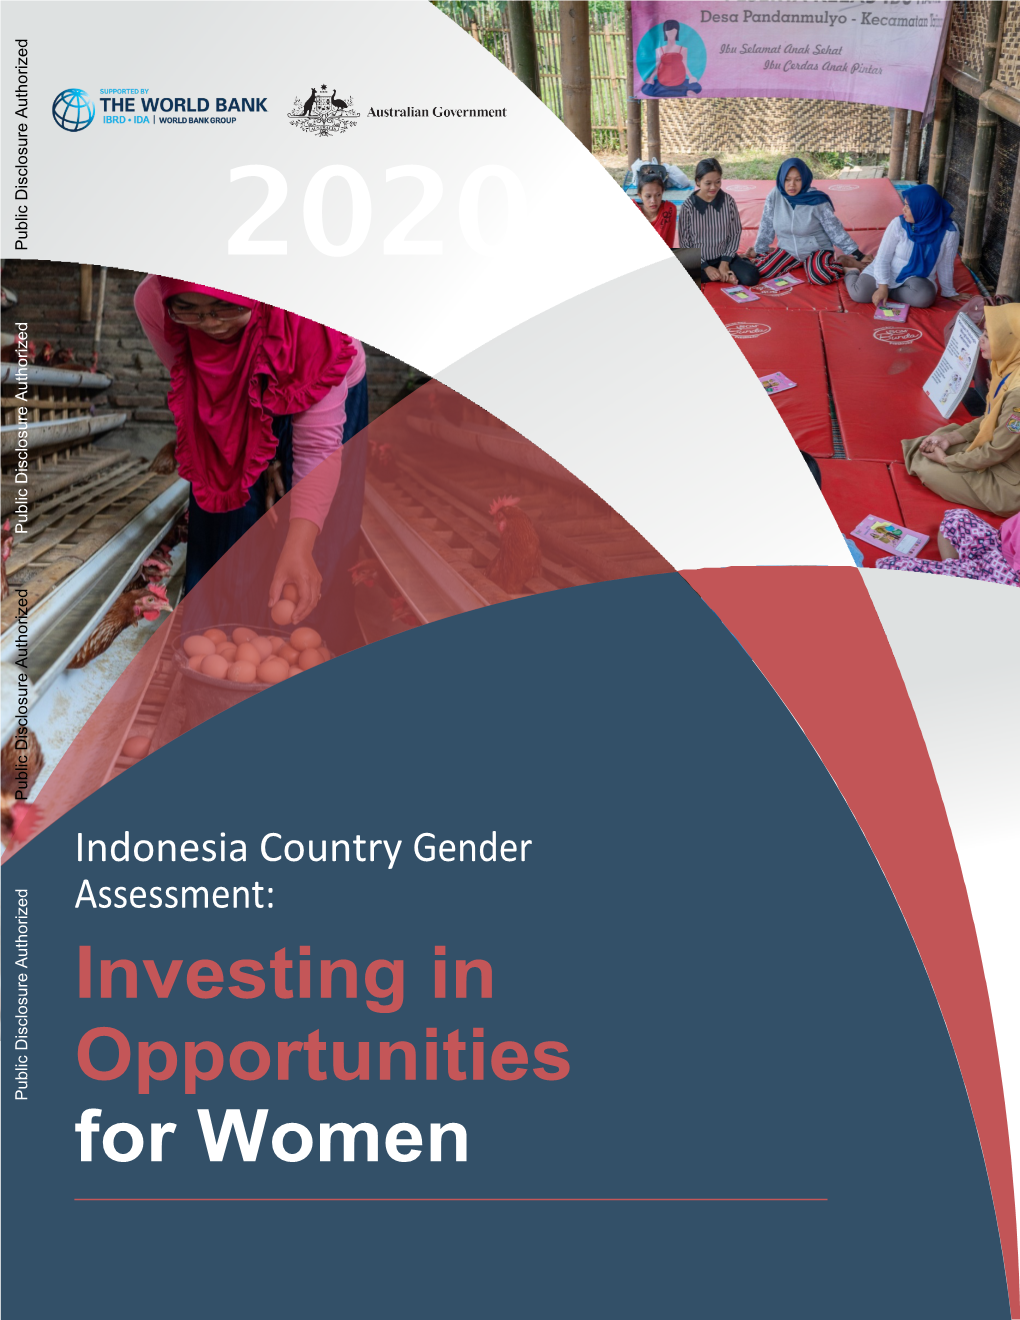 Indonesia Country Gender Assessment: Investing In